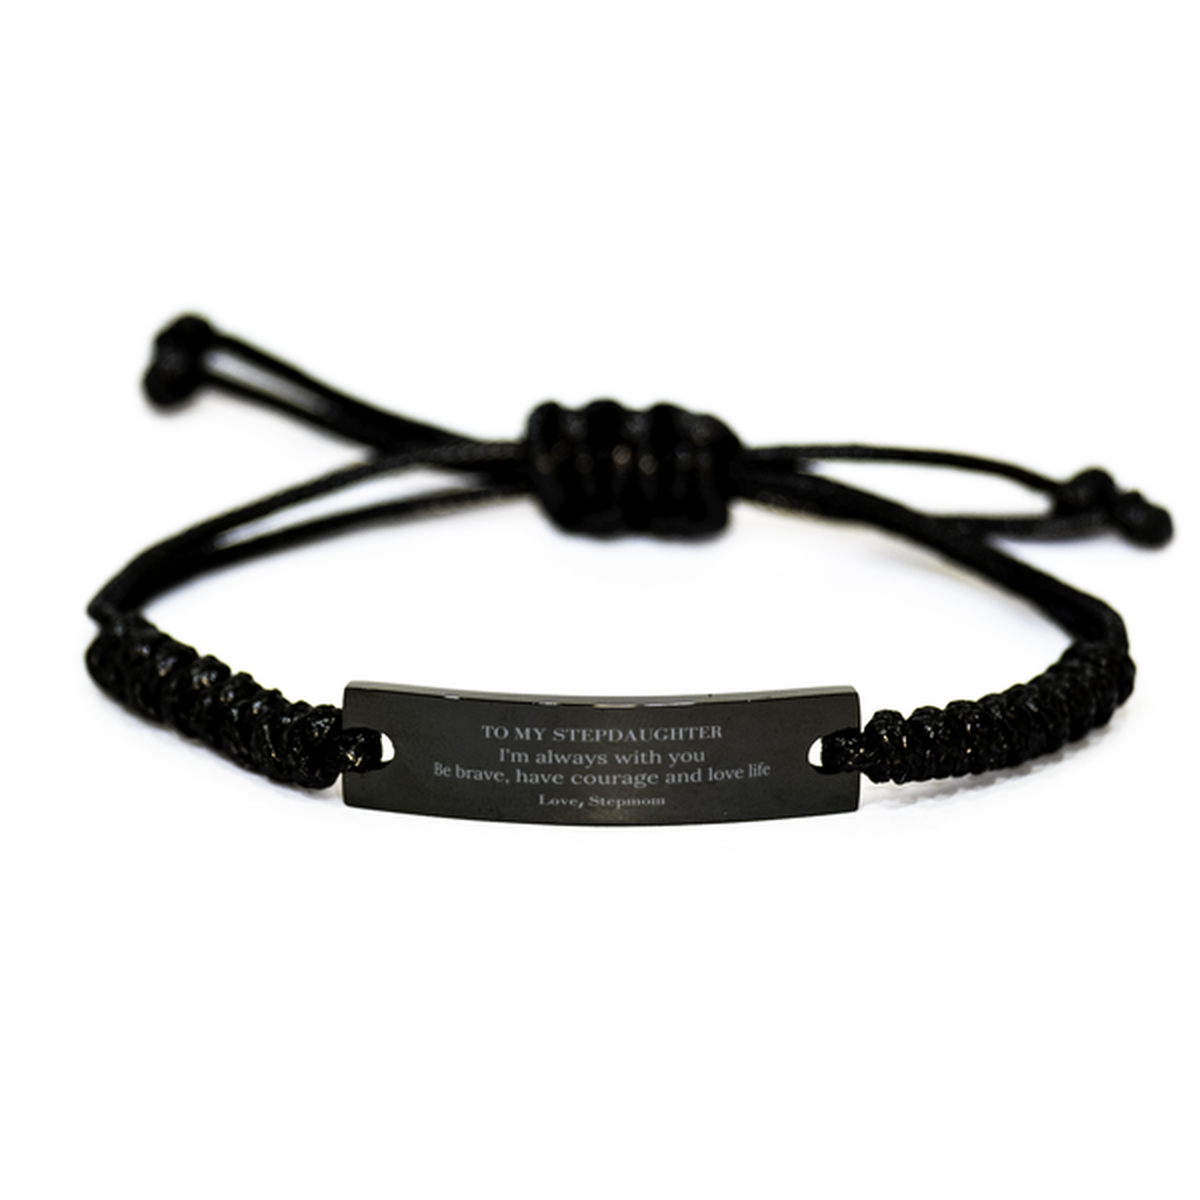 To My Stepdaughter Gifts from Stepmom, Unique Black Rope Bracelet Inspirational Christmas Birthday Graduation Gifts for Stepdaughter I'm always with you. Be brave, have courage and love life. Love, Stepmom